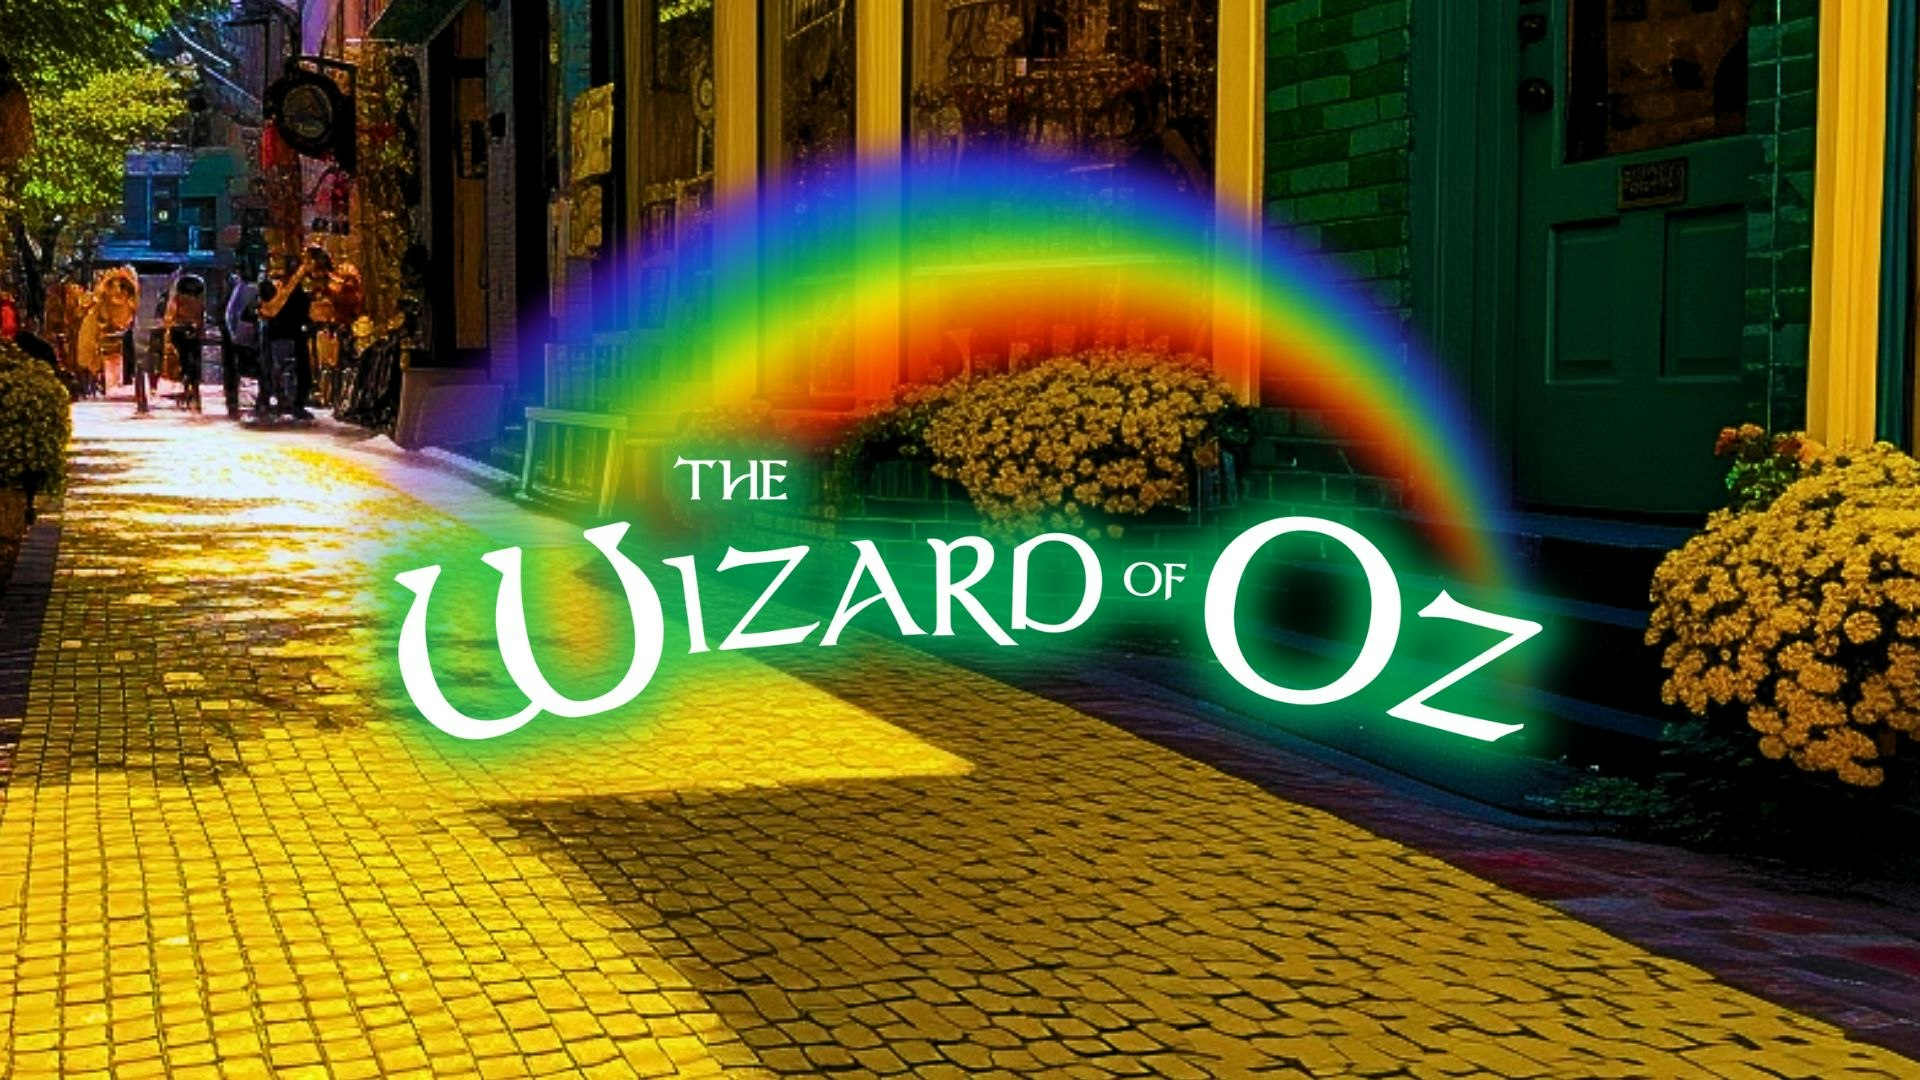 The Wizard of Oz Experience in Phoenix